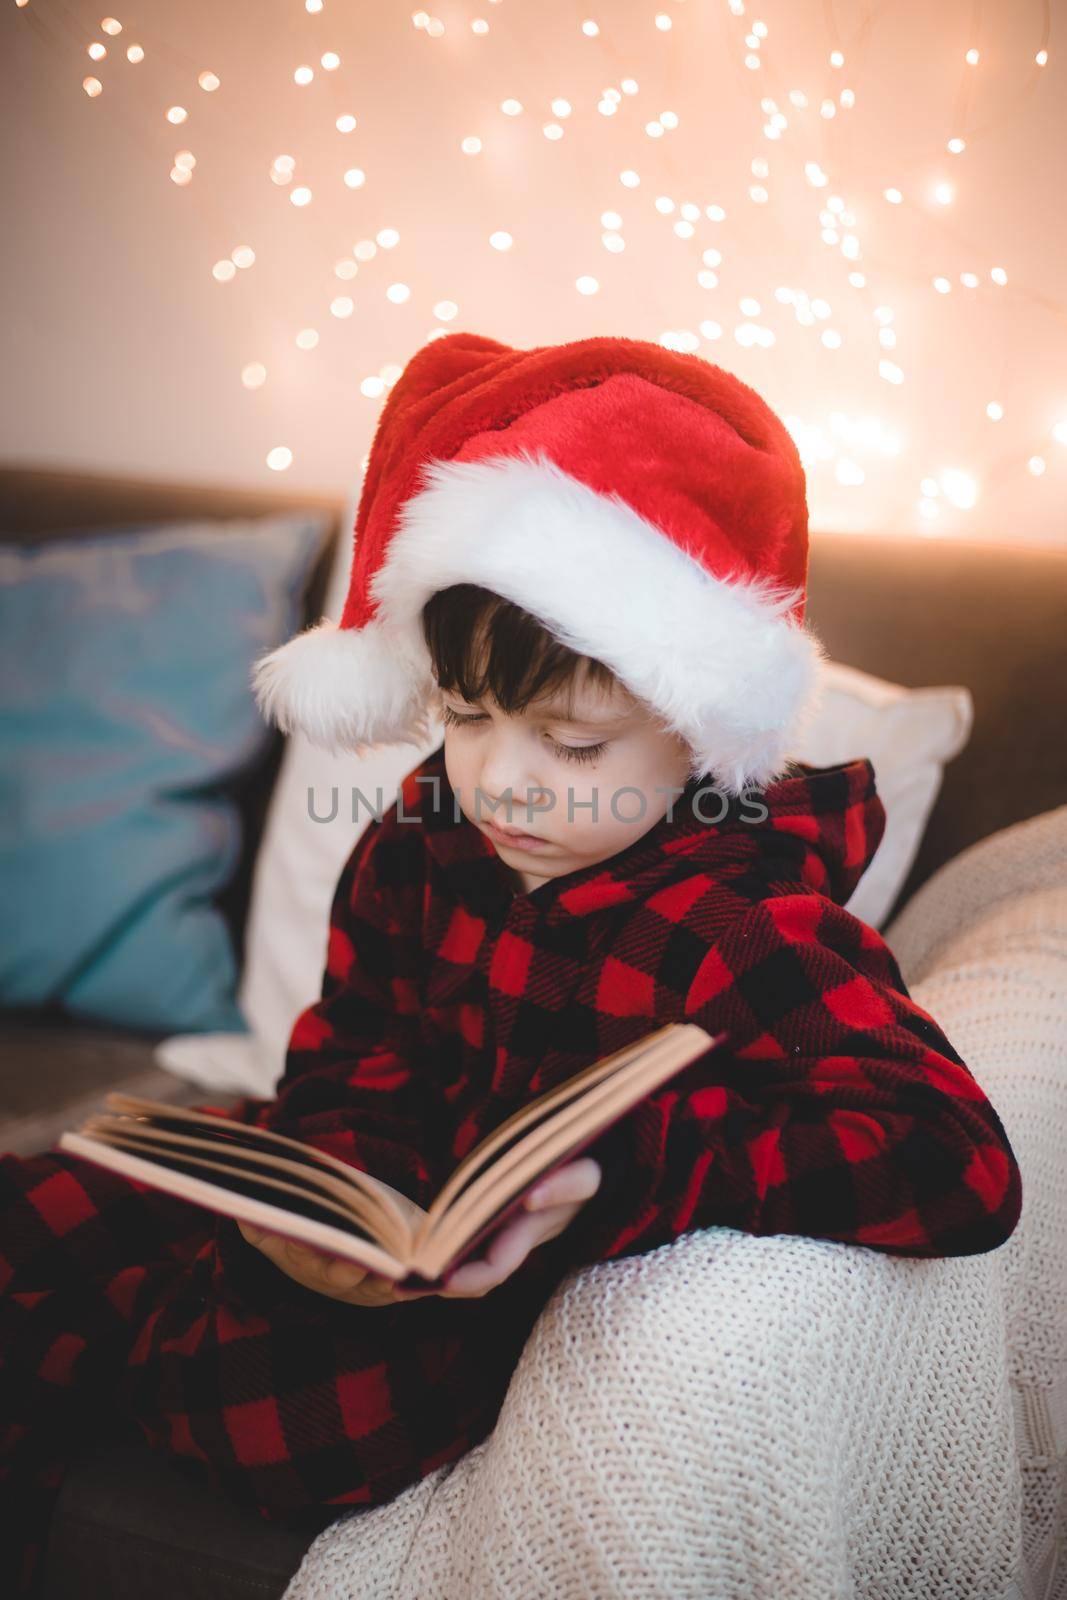 A boy in a Santa hat is reading a book on a lifestyle sofa. Reading books. New Year's mood. Garland on the wall